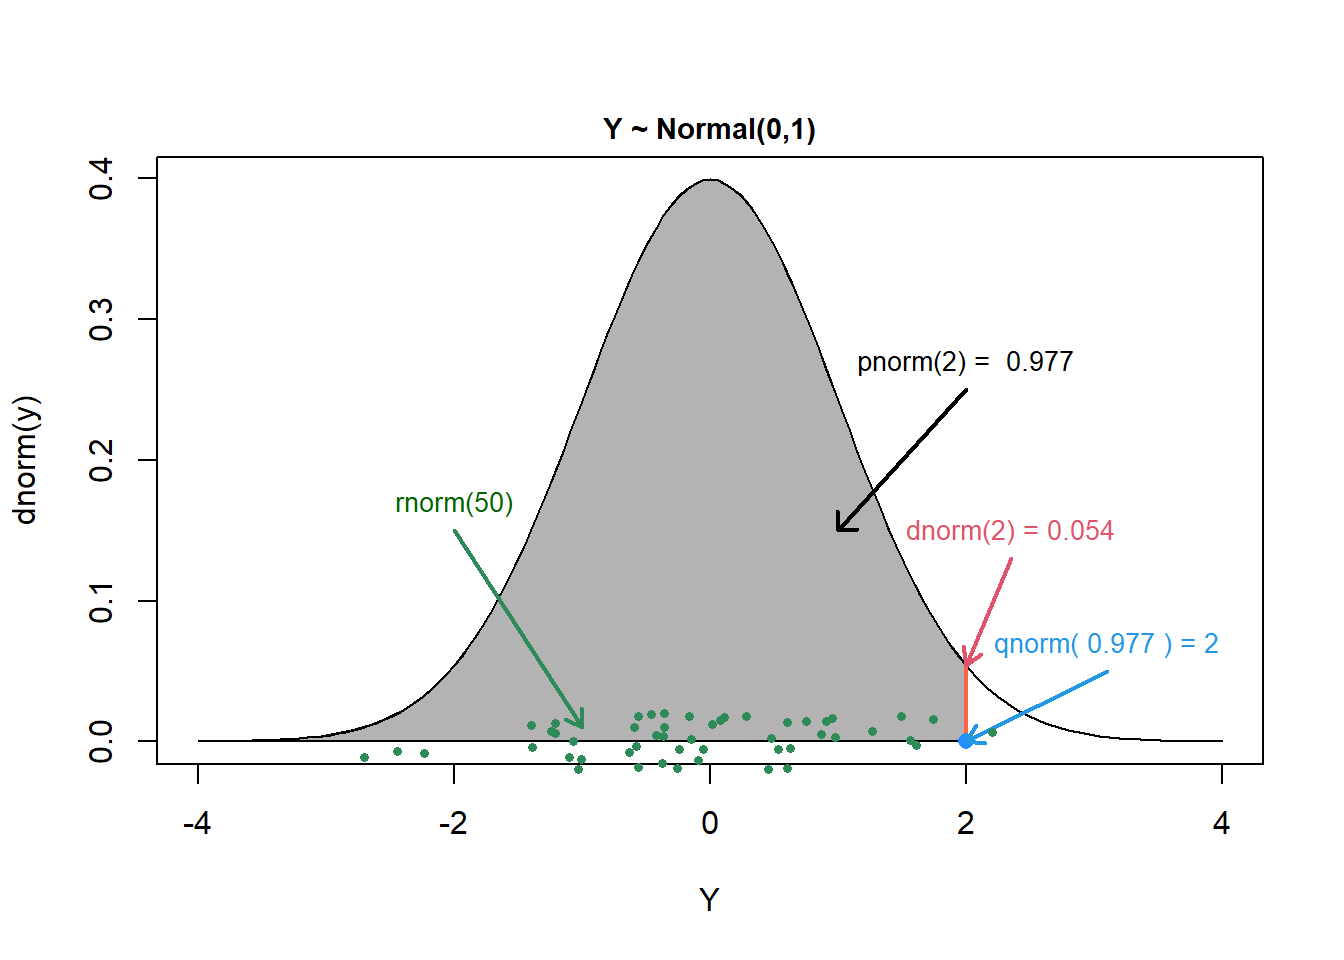 Figure created using code written by Jack Weiss and made available in his course notes depicting the 4 basic probability functions for working with the Normal distribution in R.